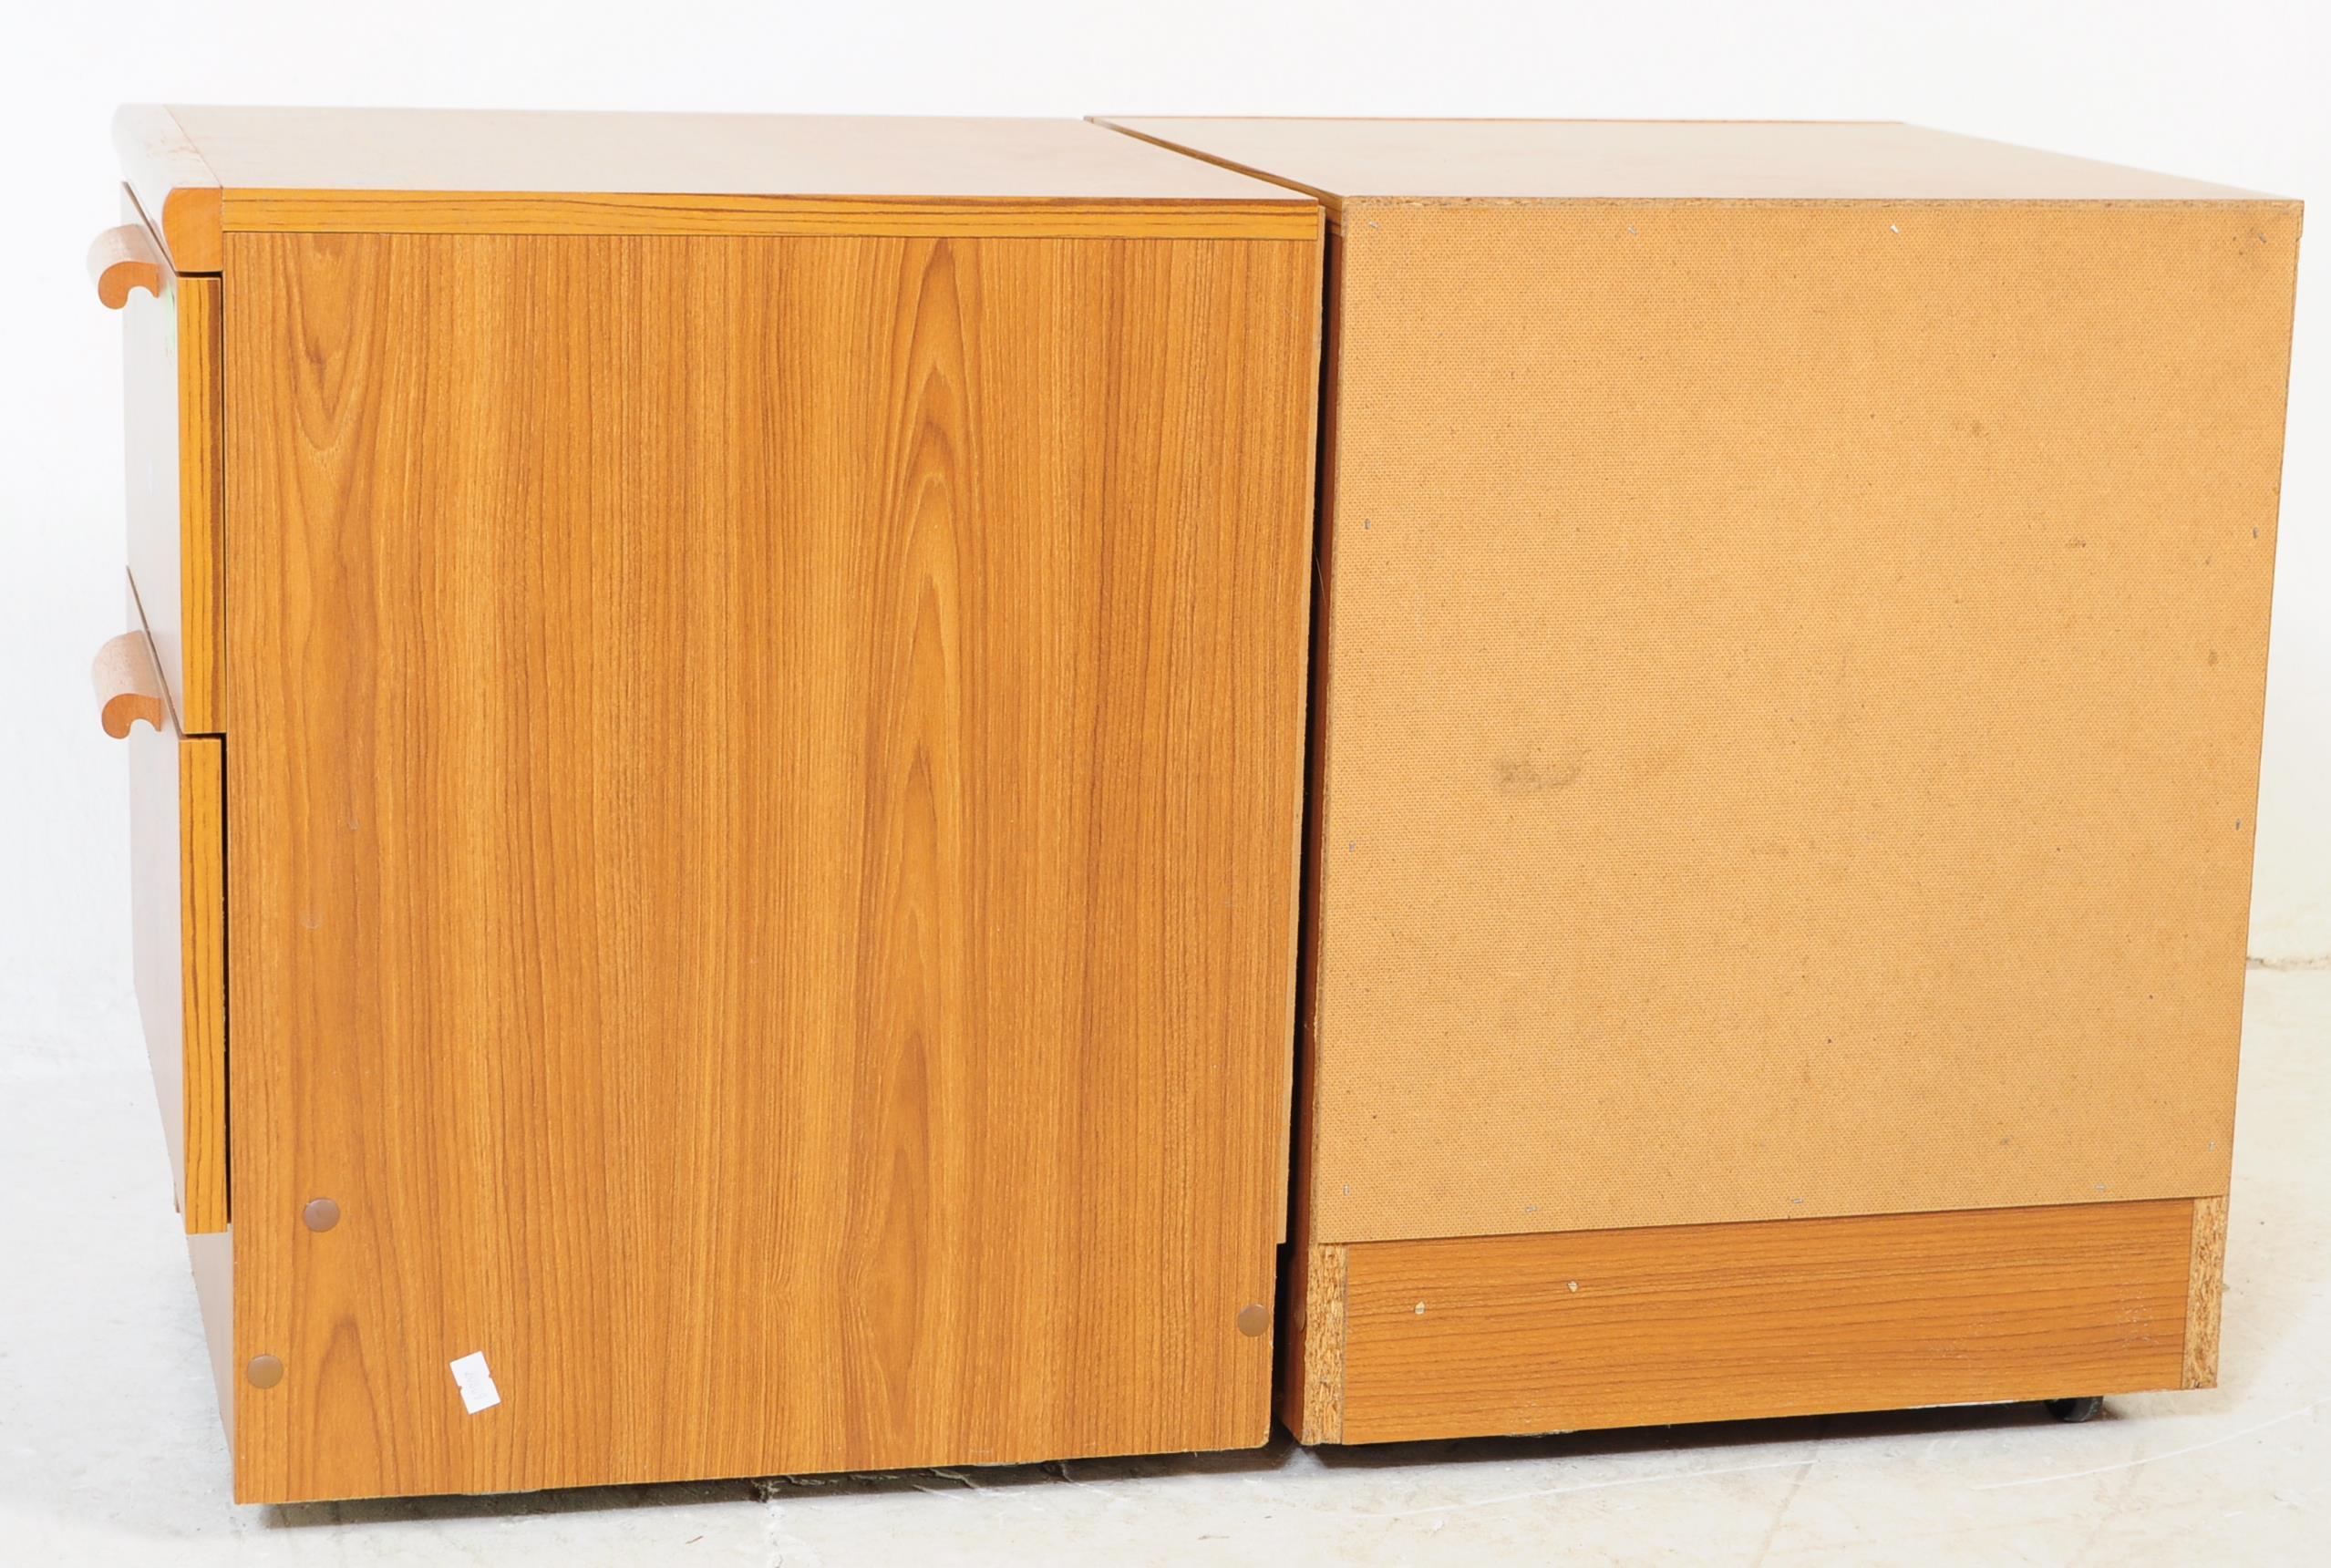 PAIR OF MID CENTURY TEAK BEDSIDE CABINETS - Image 5 of 5